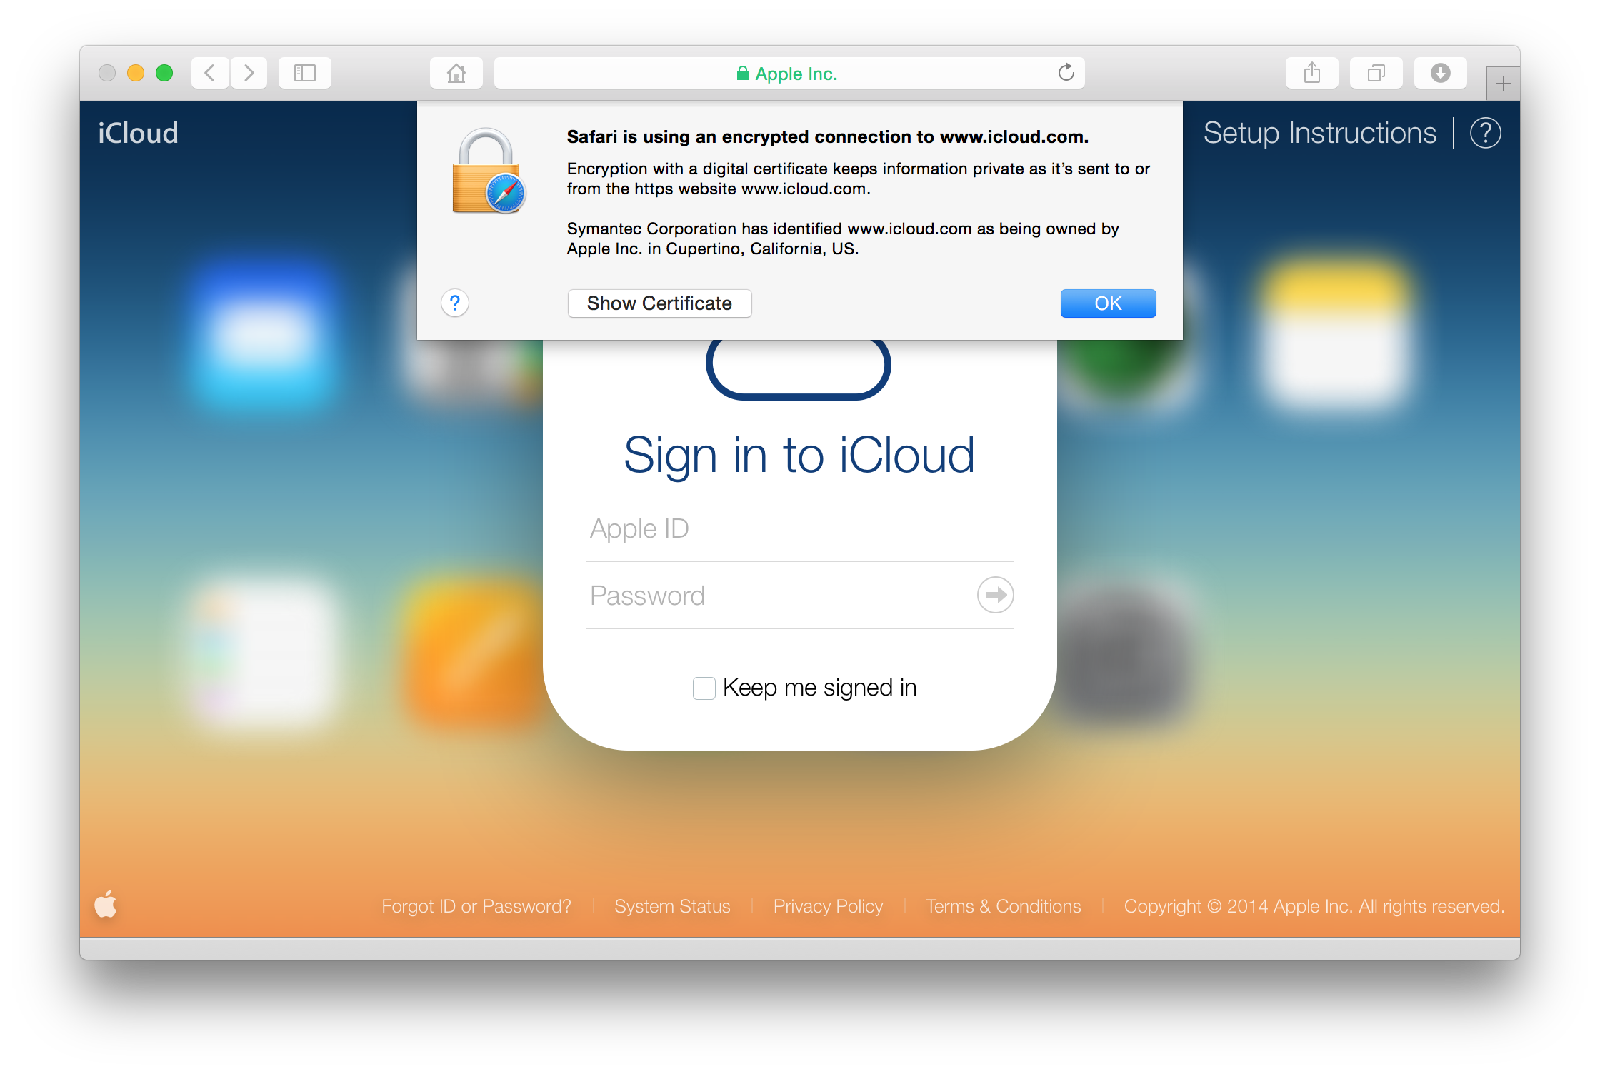 China Brushes Off iCloud Attack Accusations